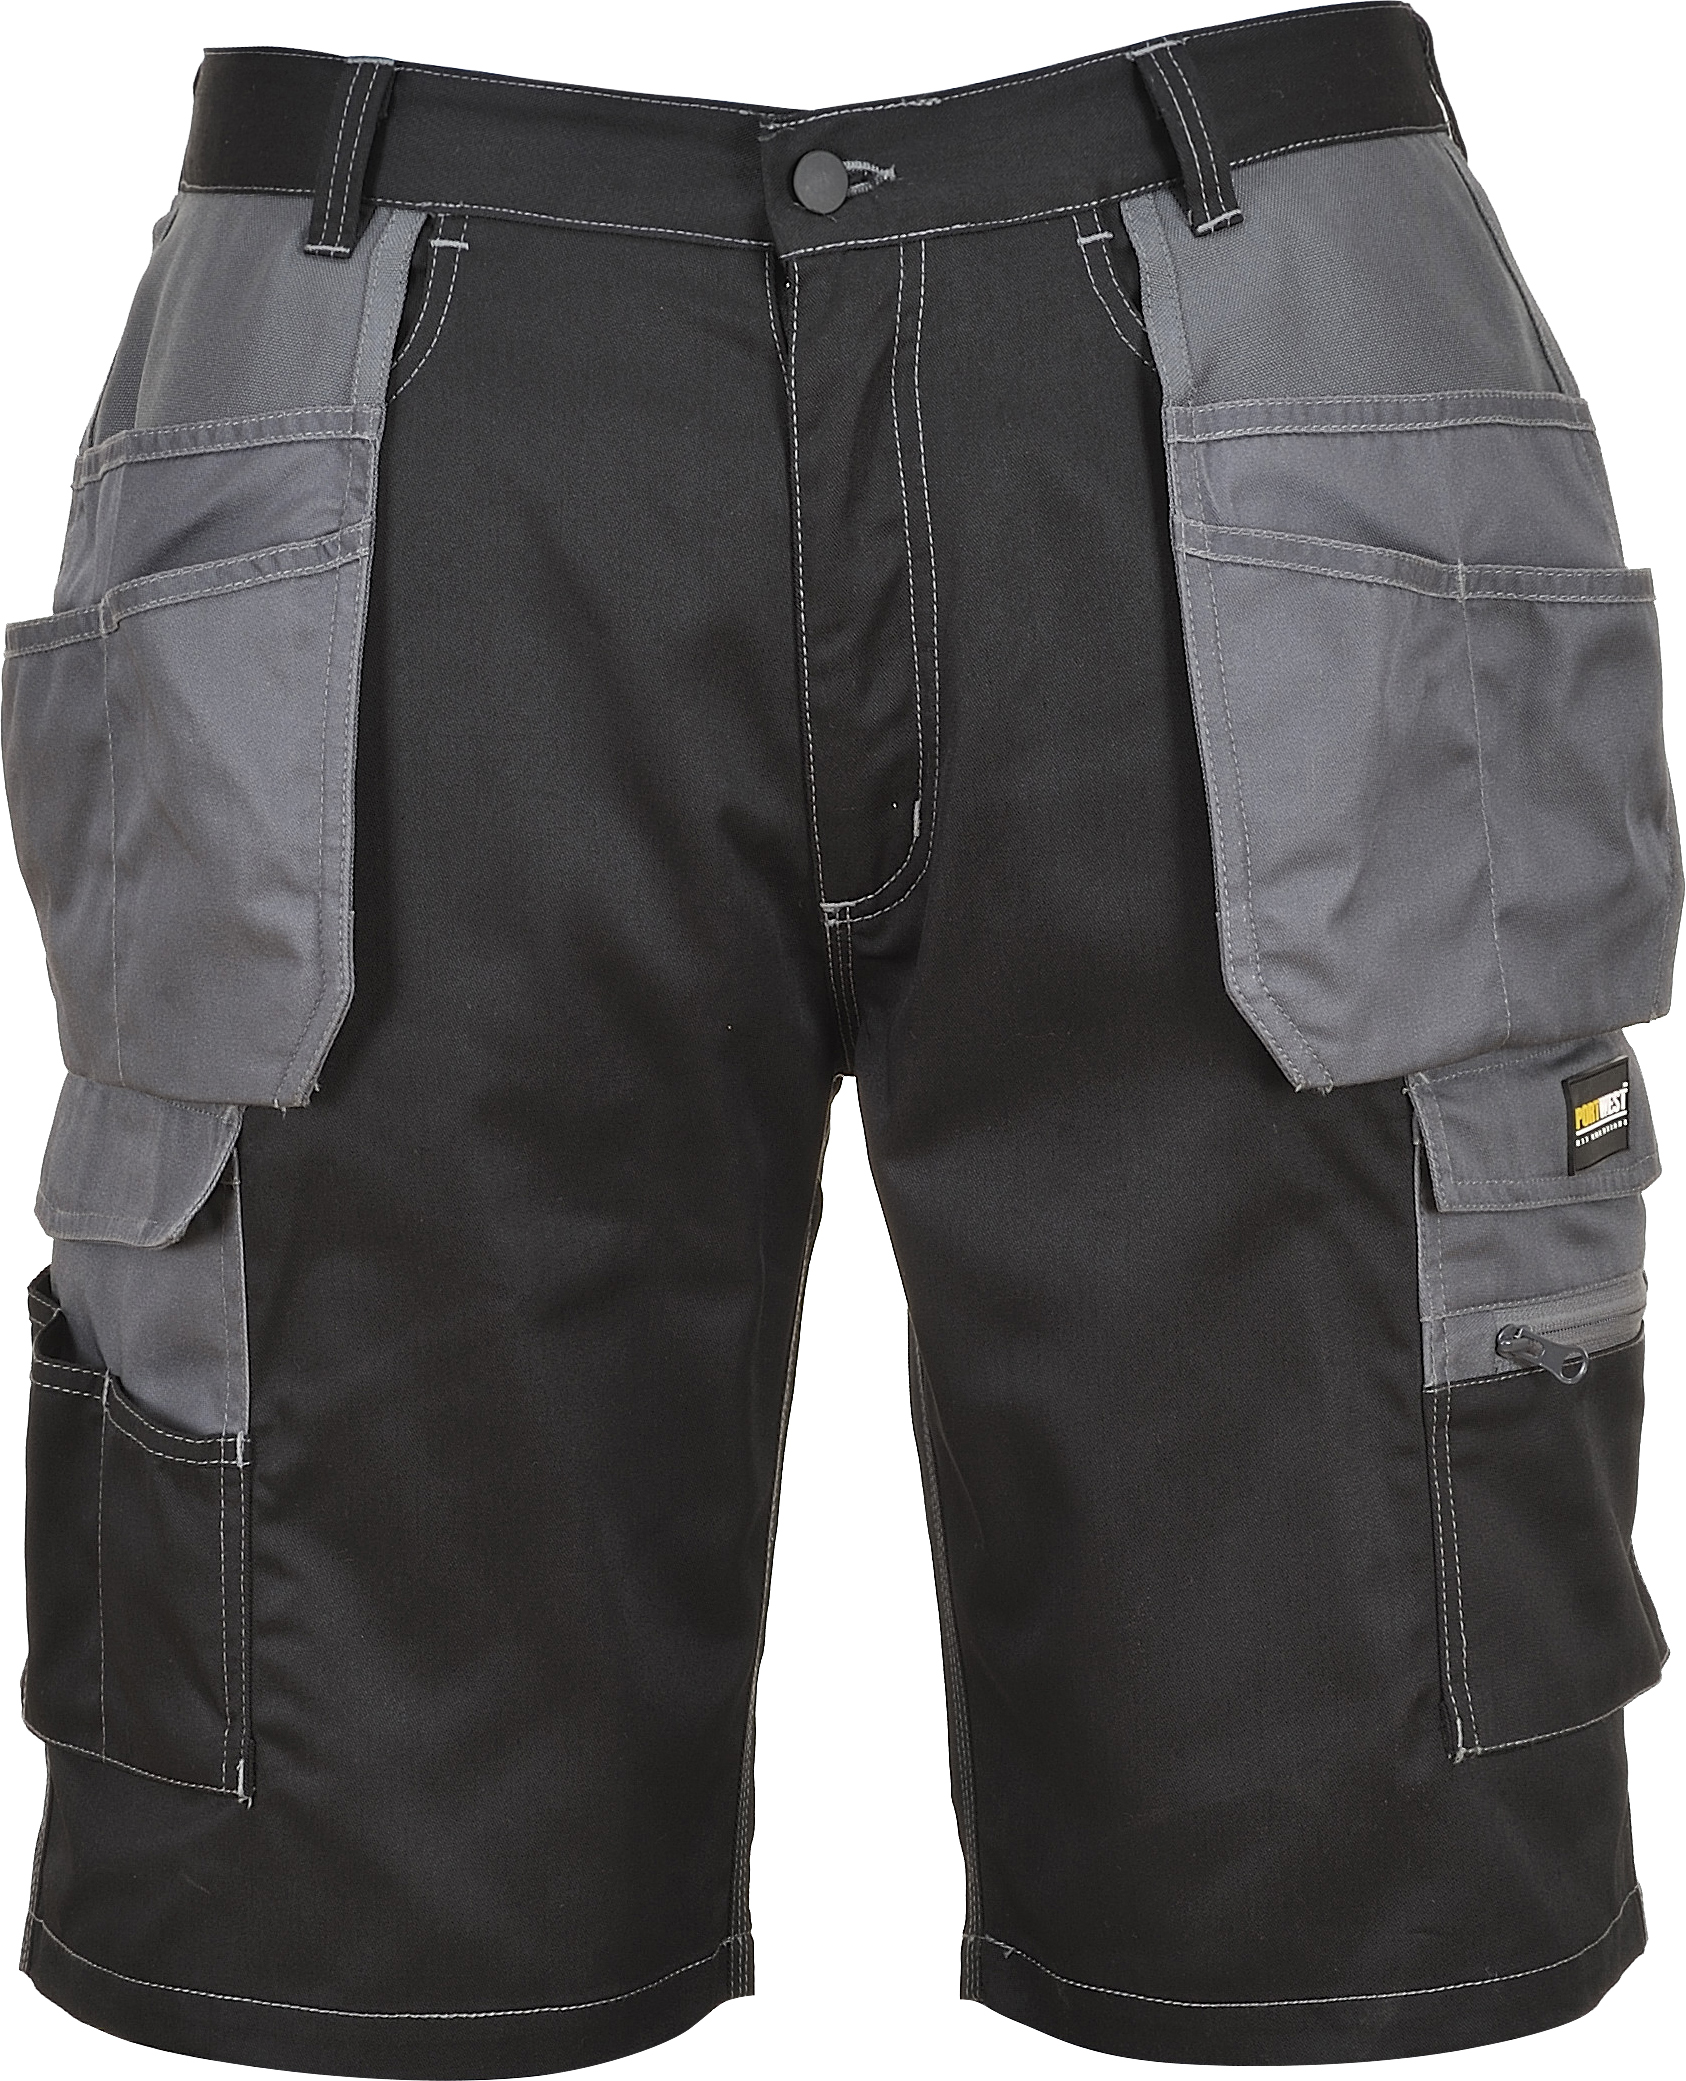 ax-httpss3.eu-west-2.amazonaws.comwebsystemstmp_for_downloadportwest-granite-holster-shorts-black-zoom-grey.jpeg